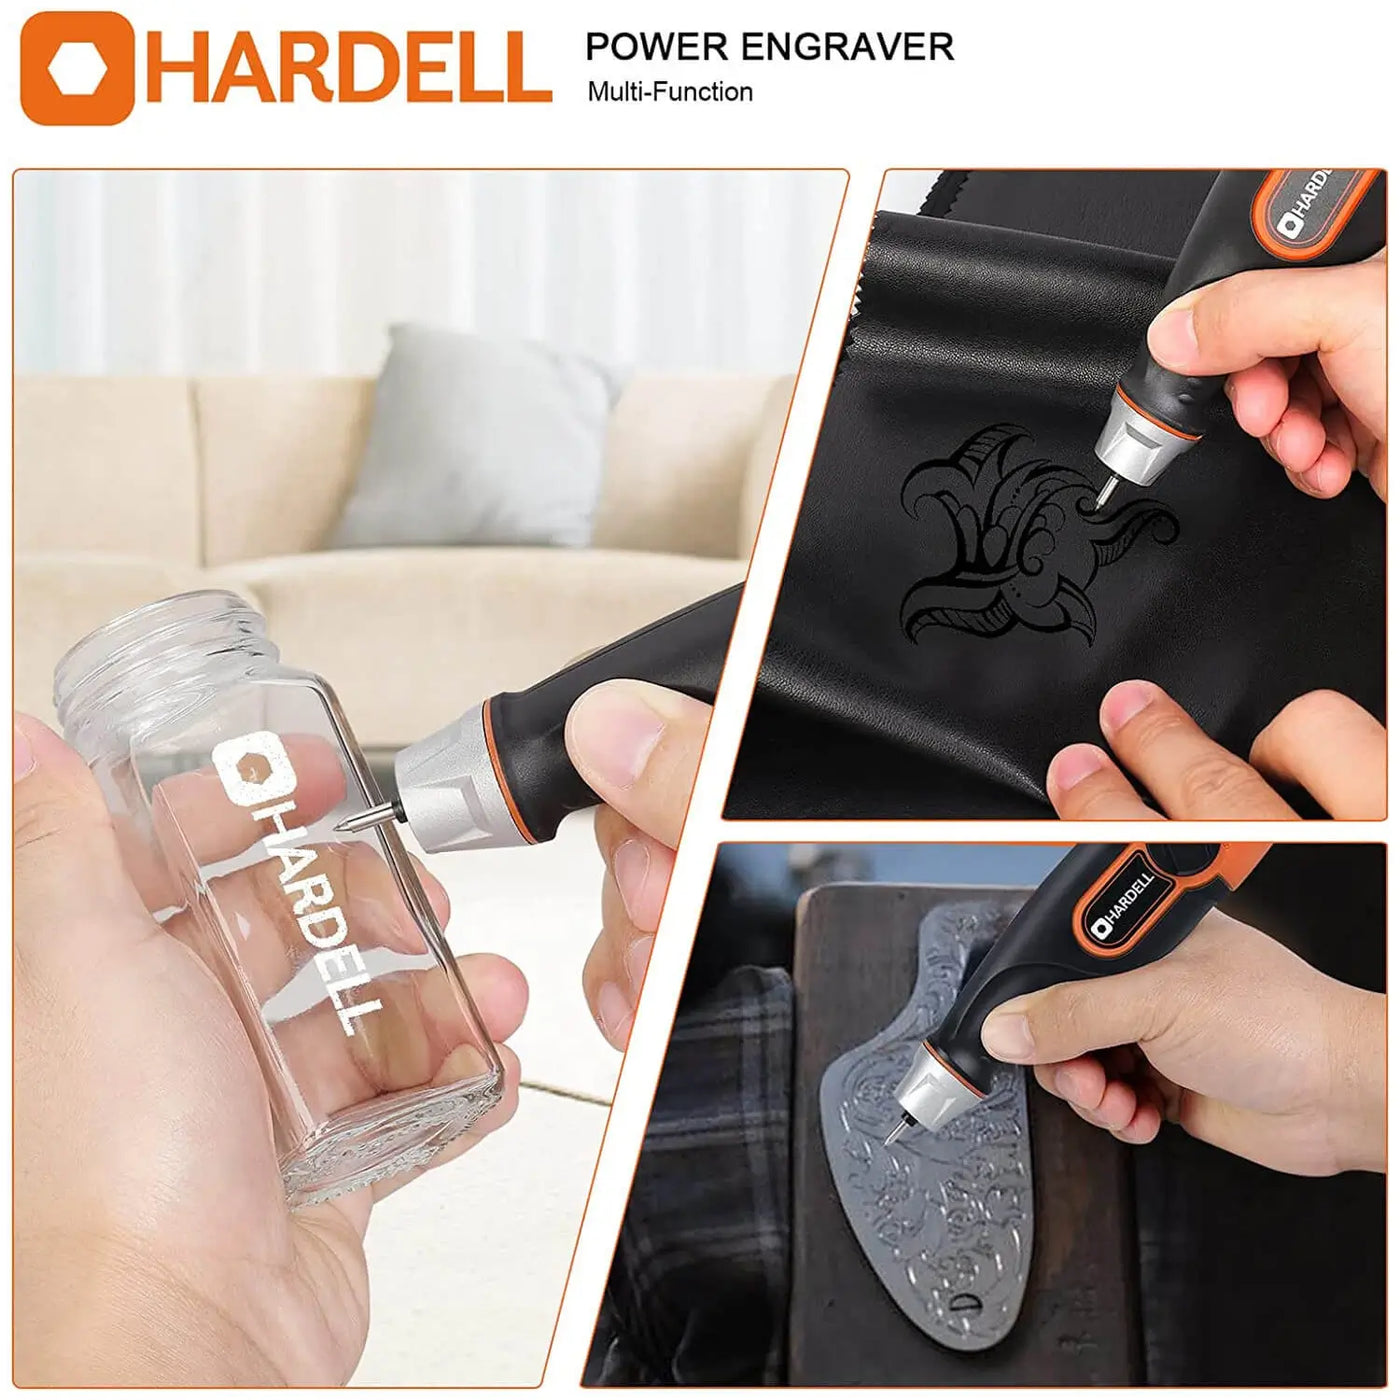 Hardell_105_24W_Corded_Engraver_08